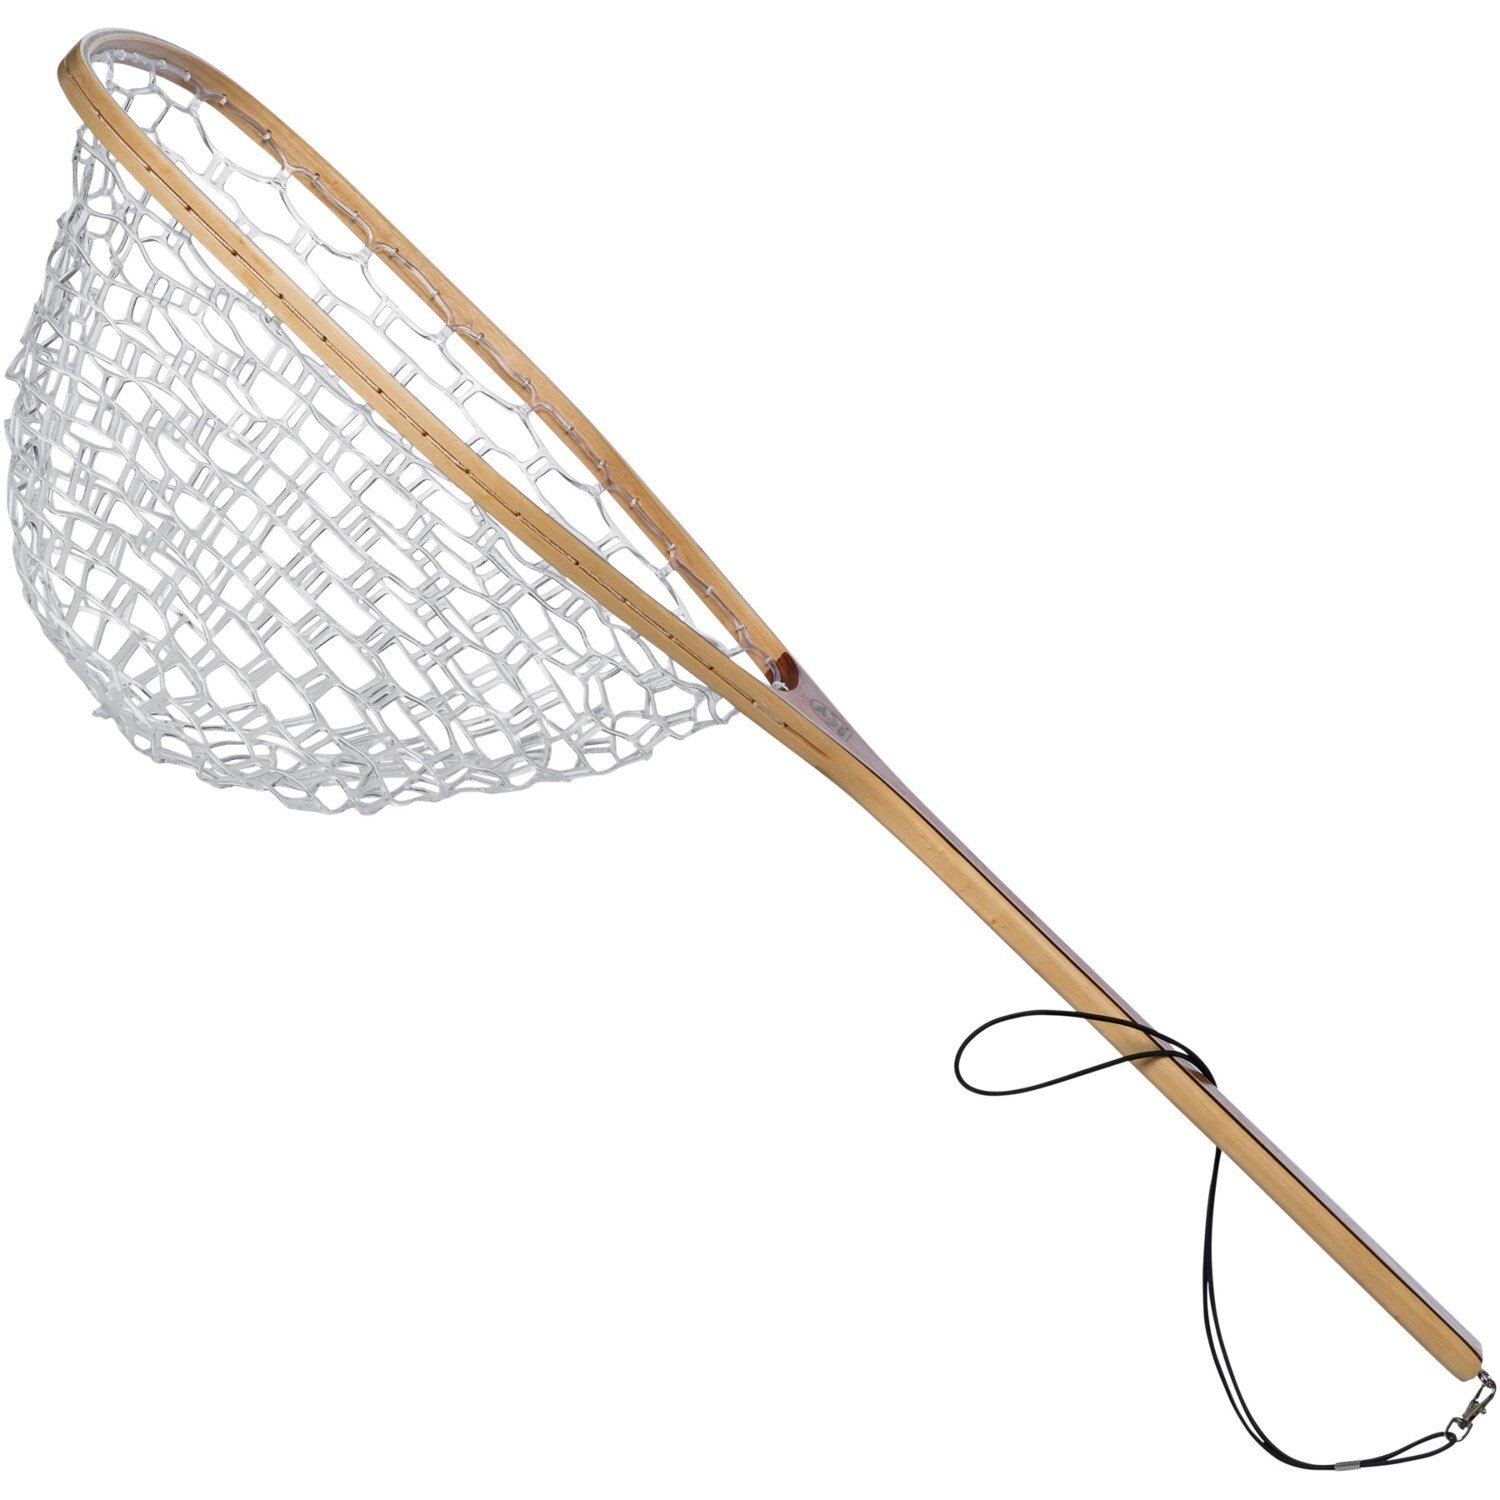 wetfly-rubber-net-with-wooden-handle-medium-in-see-photo_p_704pn_99_1500.2+(1).jpg